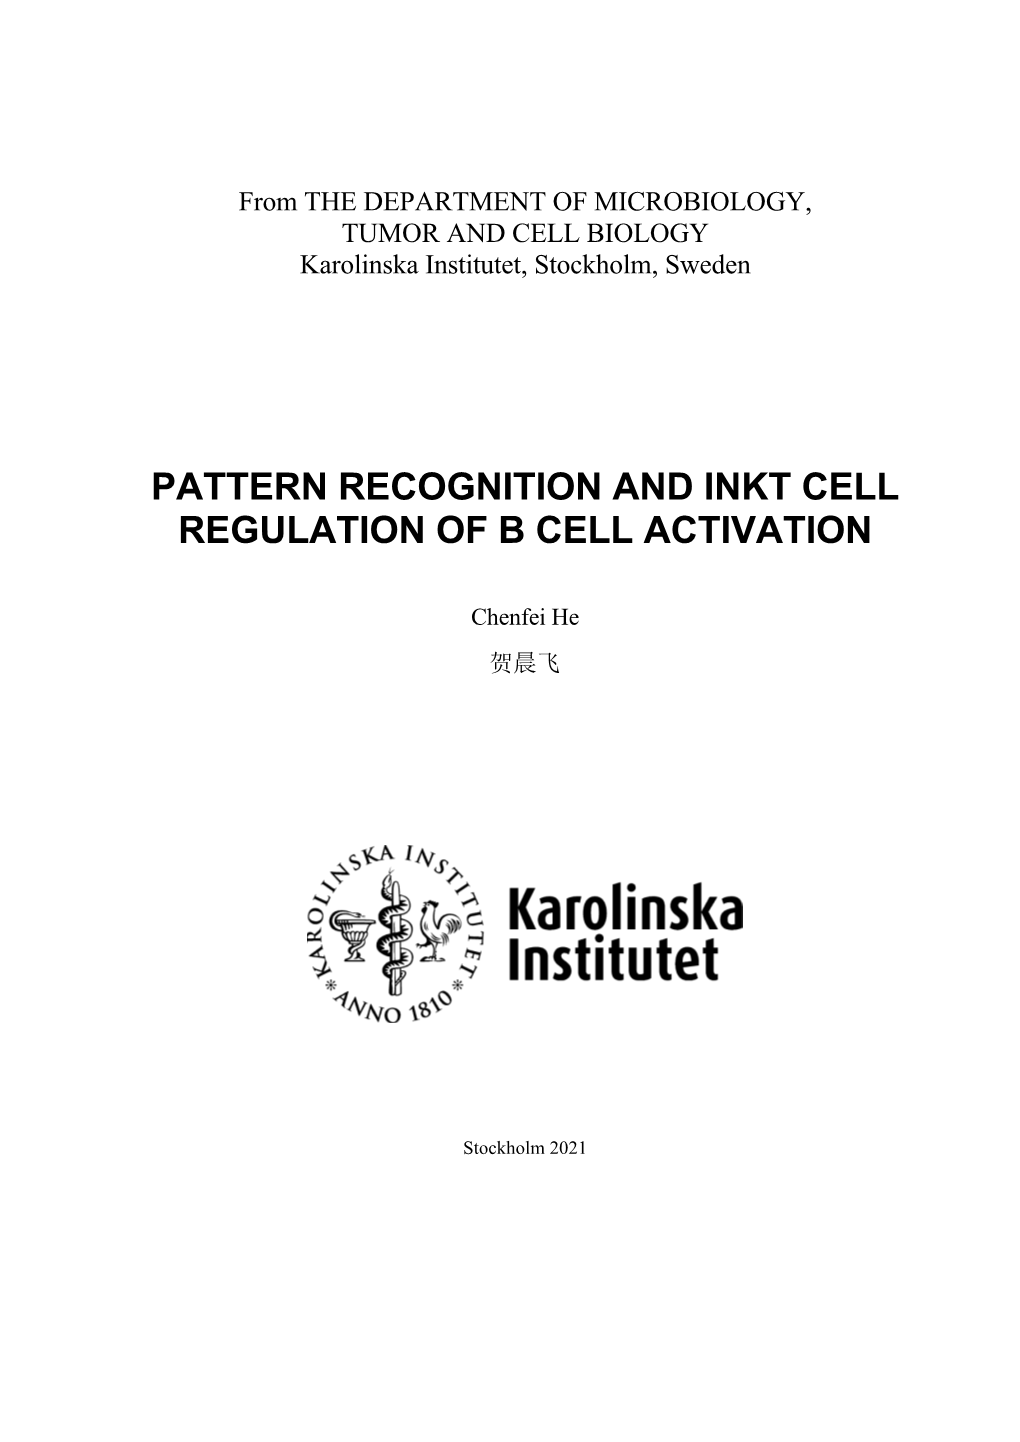 Pattern Recognition and Inkt Cell Regulation of B Cell Activation